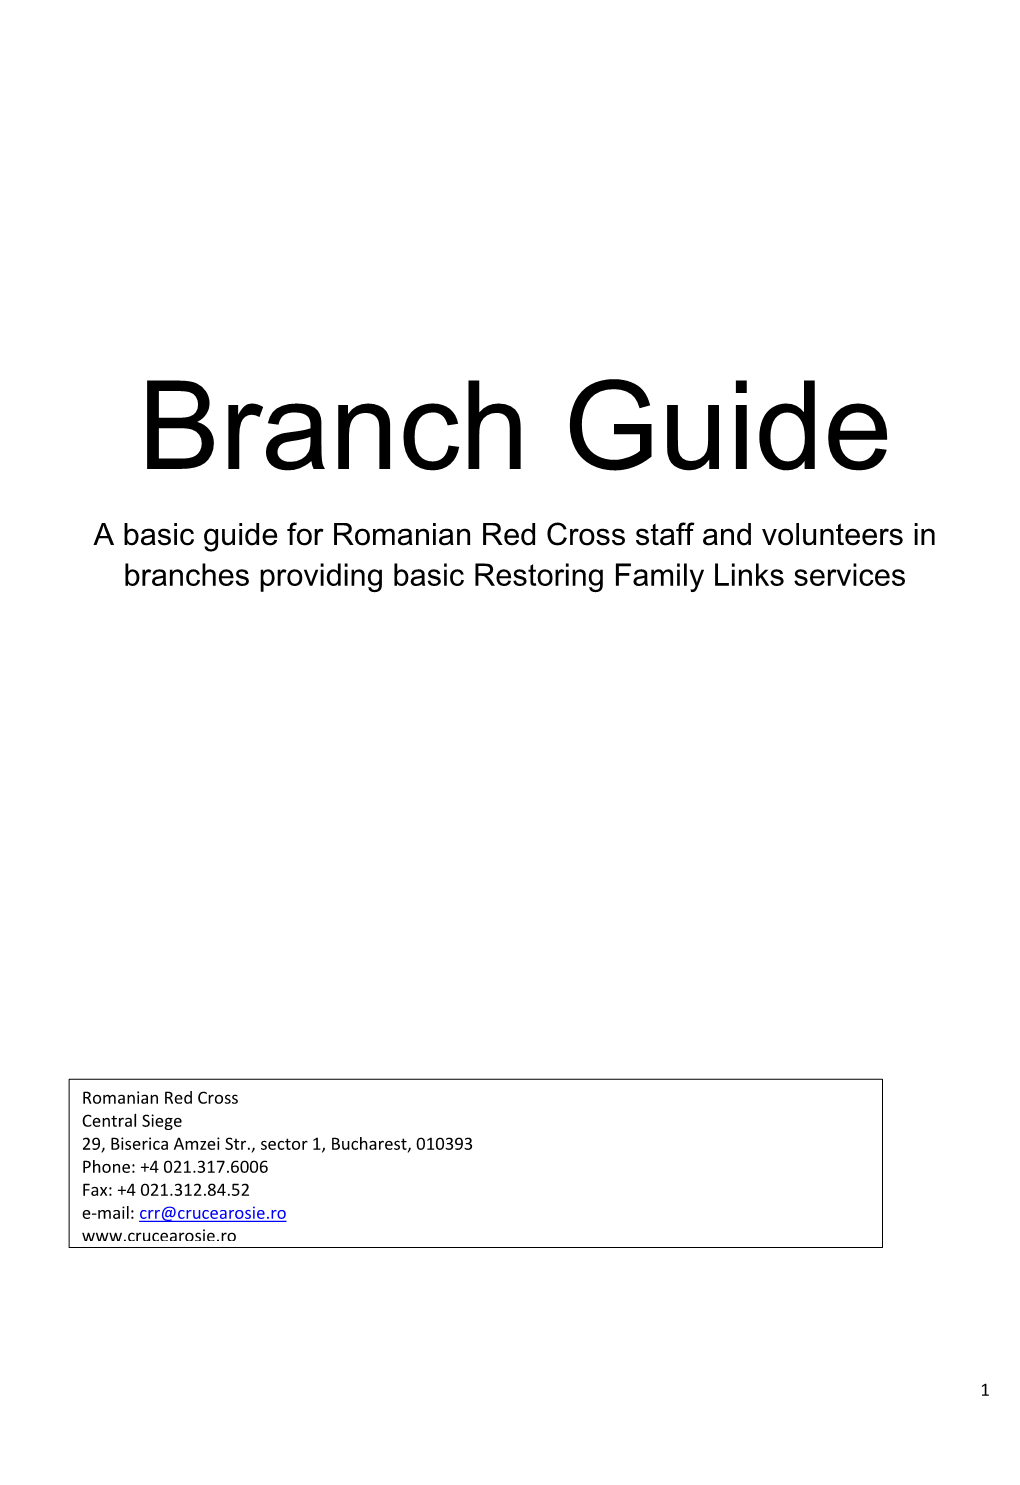 A Basic Guide for Romanian Red Cross Staff and Volunteers in Branches Providing Basic Restoring Family Links Services